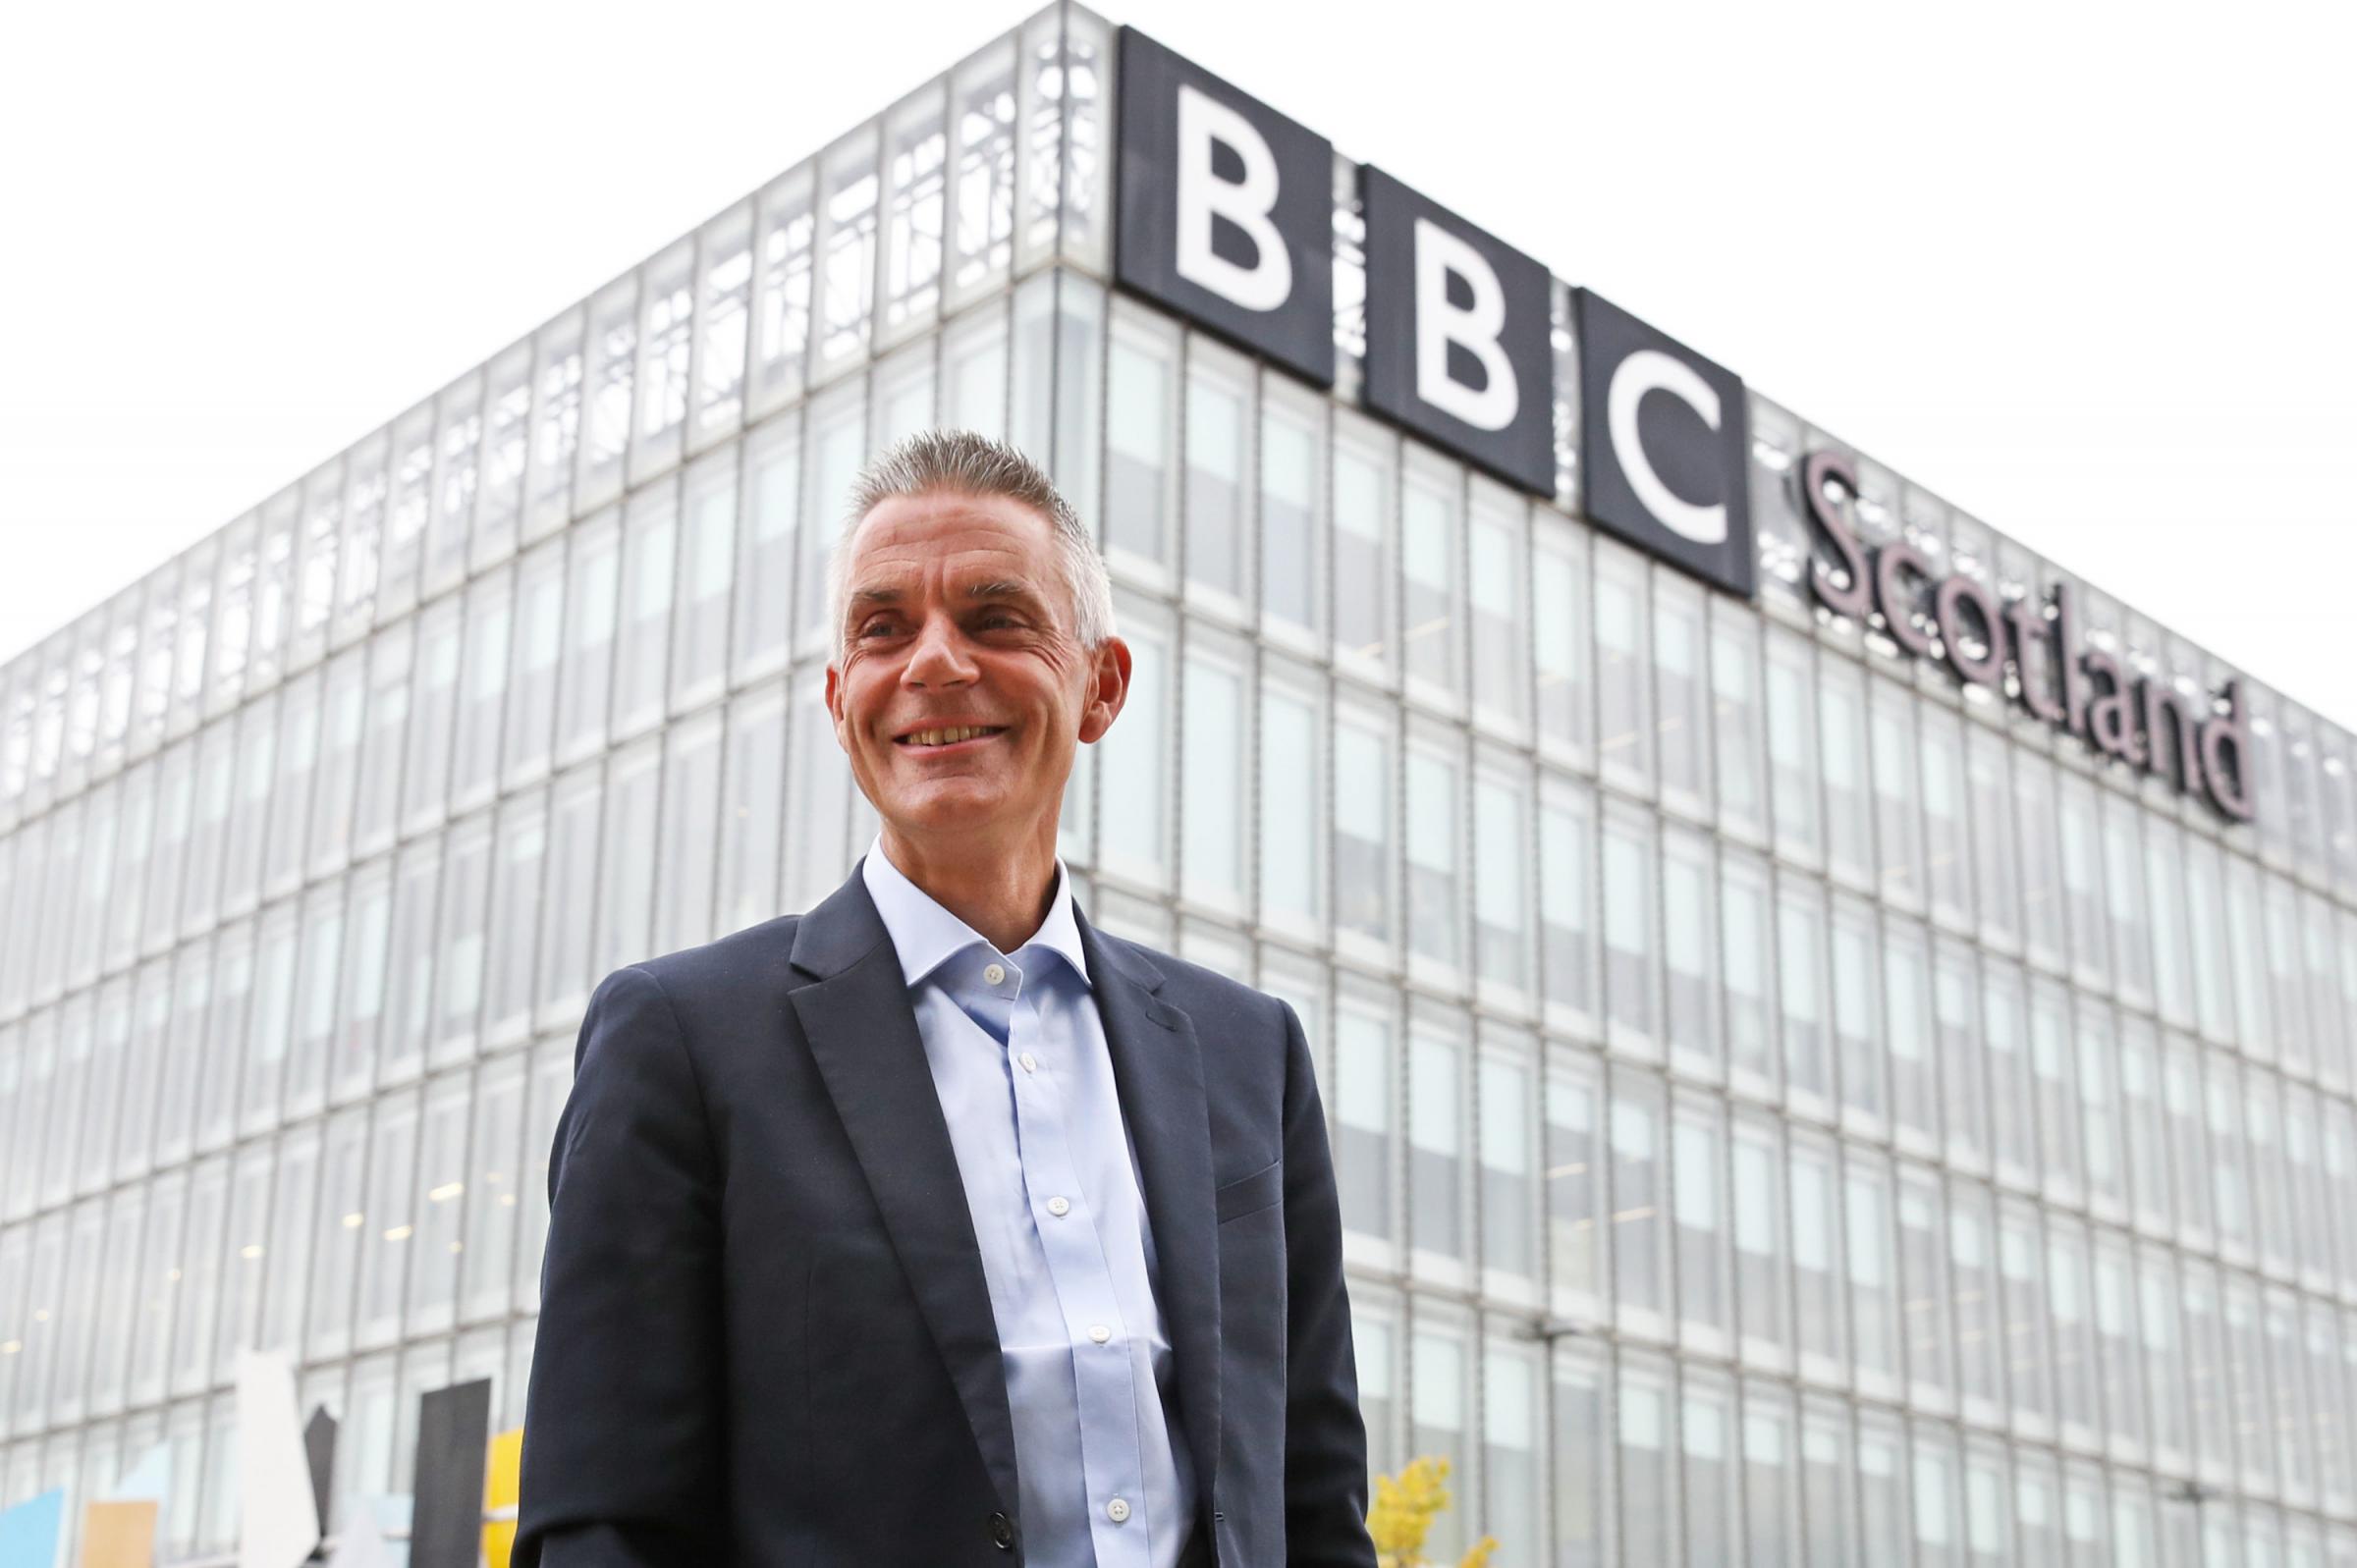 It's ironic to hear BBC's Tim Davie talk about 'trusted and impartial news'